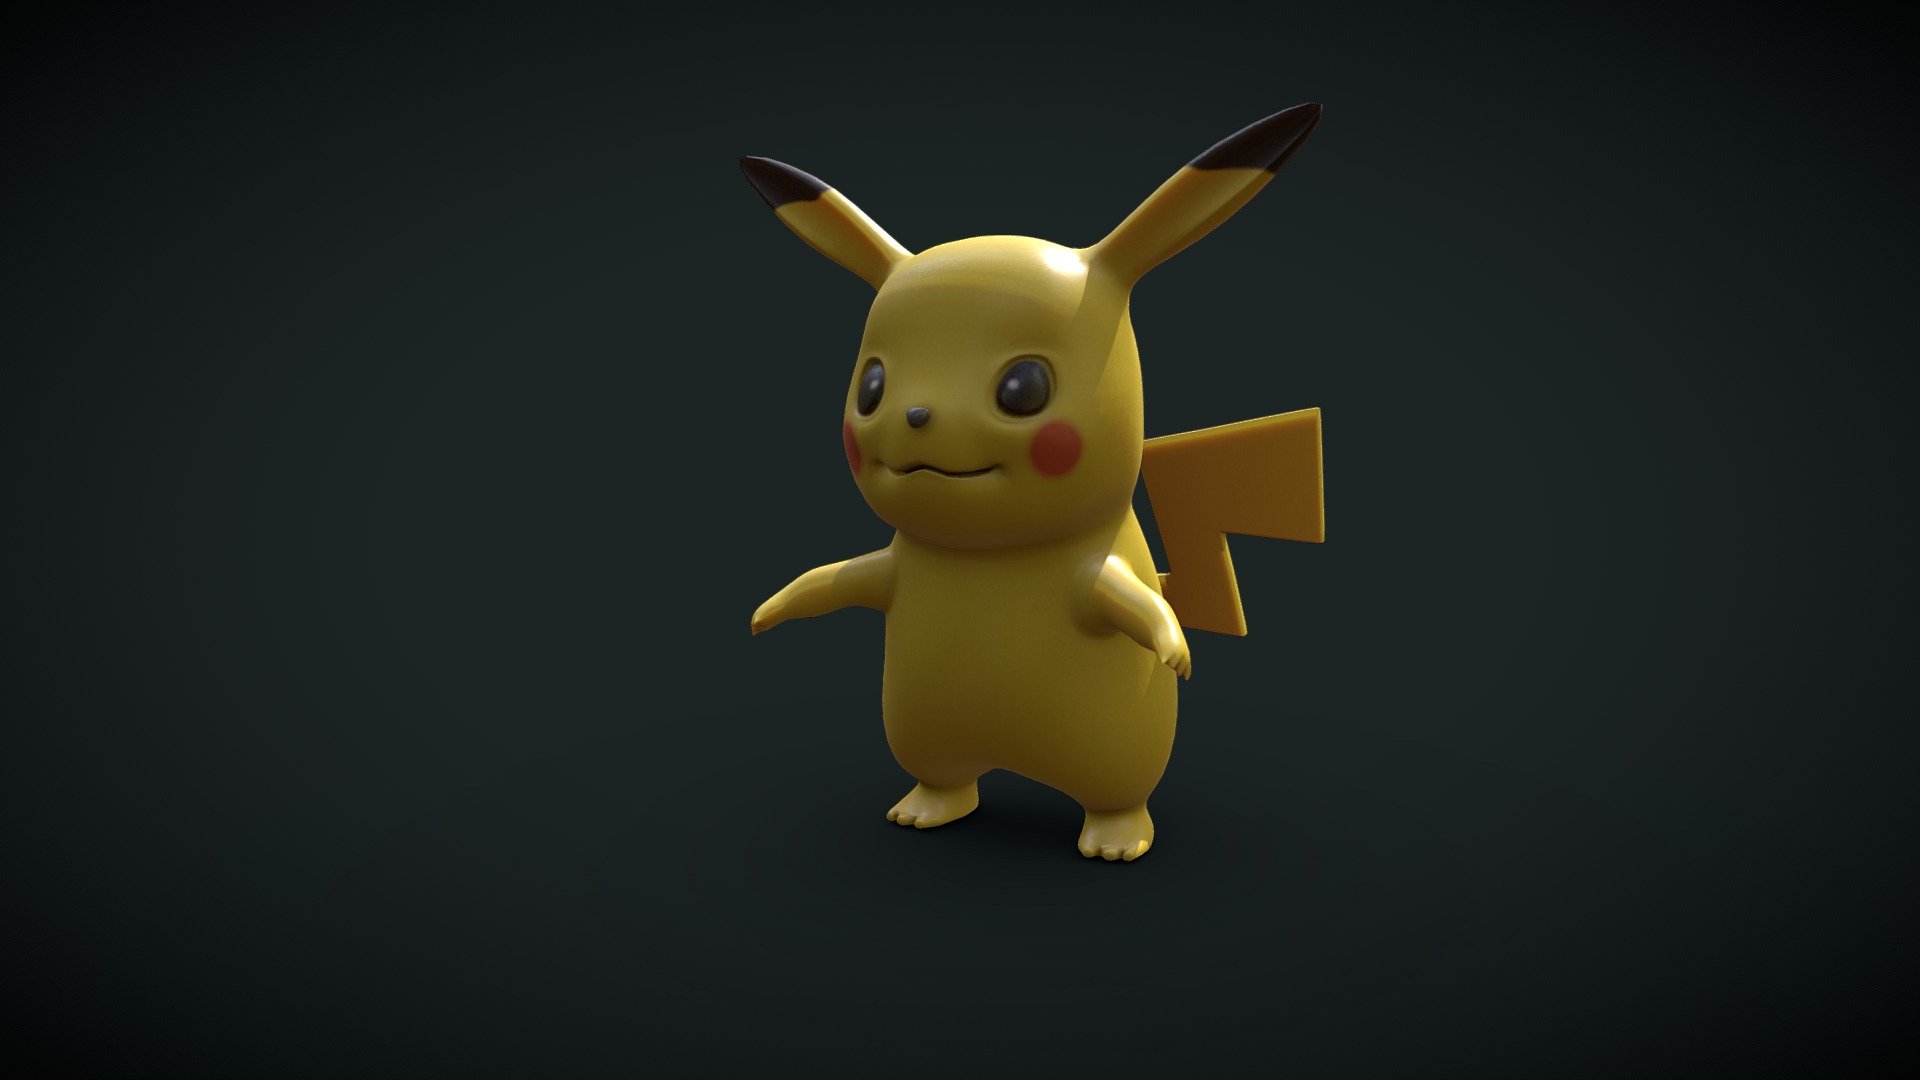 Introducing an adorable 3D model of Pikachu, the beloved Pokémon! This meticulously crafted 3D representation captures Pikachu's charm and character in exquisite detail. Whether you're a Pokémon enthusiast, collector, or just a fan of cute and iconic characters, this Pikachu model is a must-have addition to your collection.

Key Features:

Incredible Detail: This 3D model replicates Pikachu's distinctive features, from its rosy cheeks and expressive eyes to its iconic lightning bolt-shaped tail.

Realistic Textures: Each element, from Pikachu's vibrant yellow fur to its red cheeks, is rendered with lifelike textures for an authentic appearance.

Versatile Use: Perfect for Pokémon fans, collectors, or anyone seeking to infuse their projects with the charm of Pikachu.

Add this 3D Pikachu model to your collection, and let the world's most famous Pokémon brighten up your 3D projects, games, or animations. Pikachu is ready to bring a spark of joy to your digital world! - Pikachu - Buy Royalty Free 3D model by Sujit mishra (@sujitanshumishra) 3d model